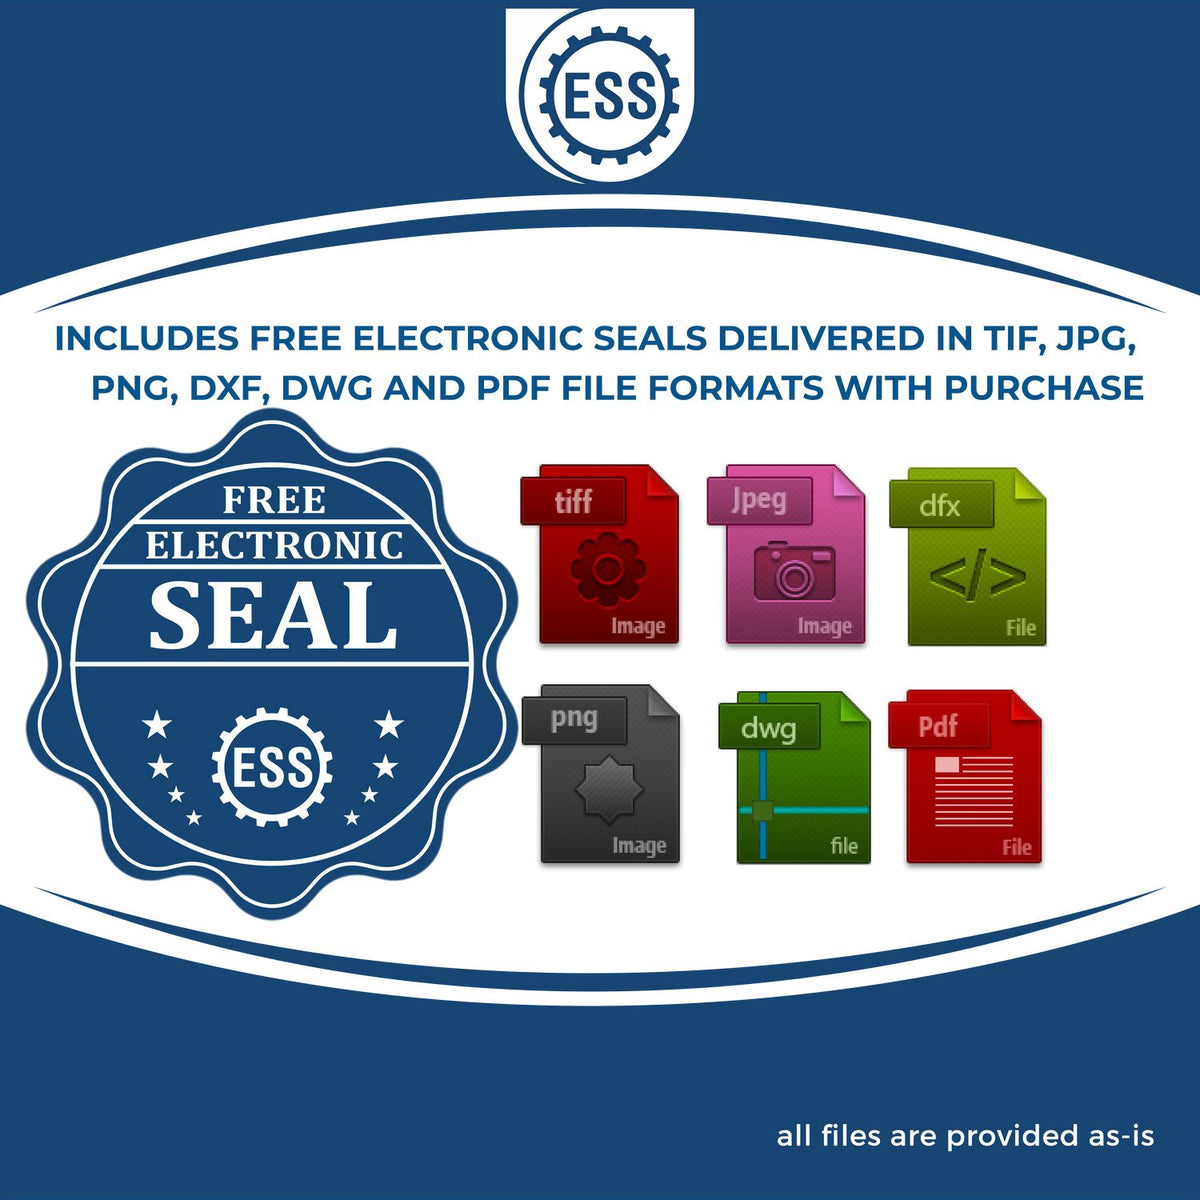 An infographic for the free electronic seal for the Gift Maine Engineer Seal illustrating the different file type icons such as DXF, DWG, TIF, JPG and PNG.